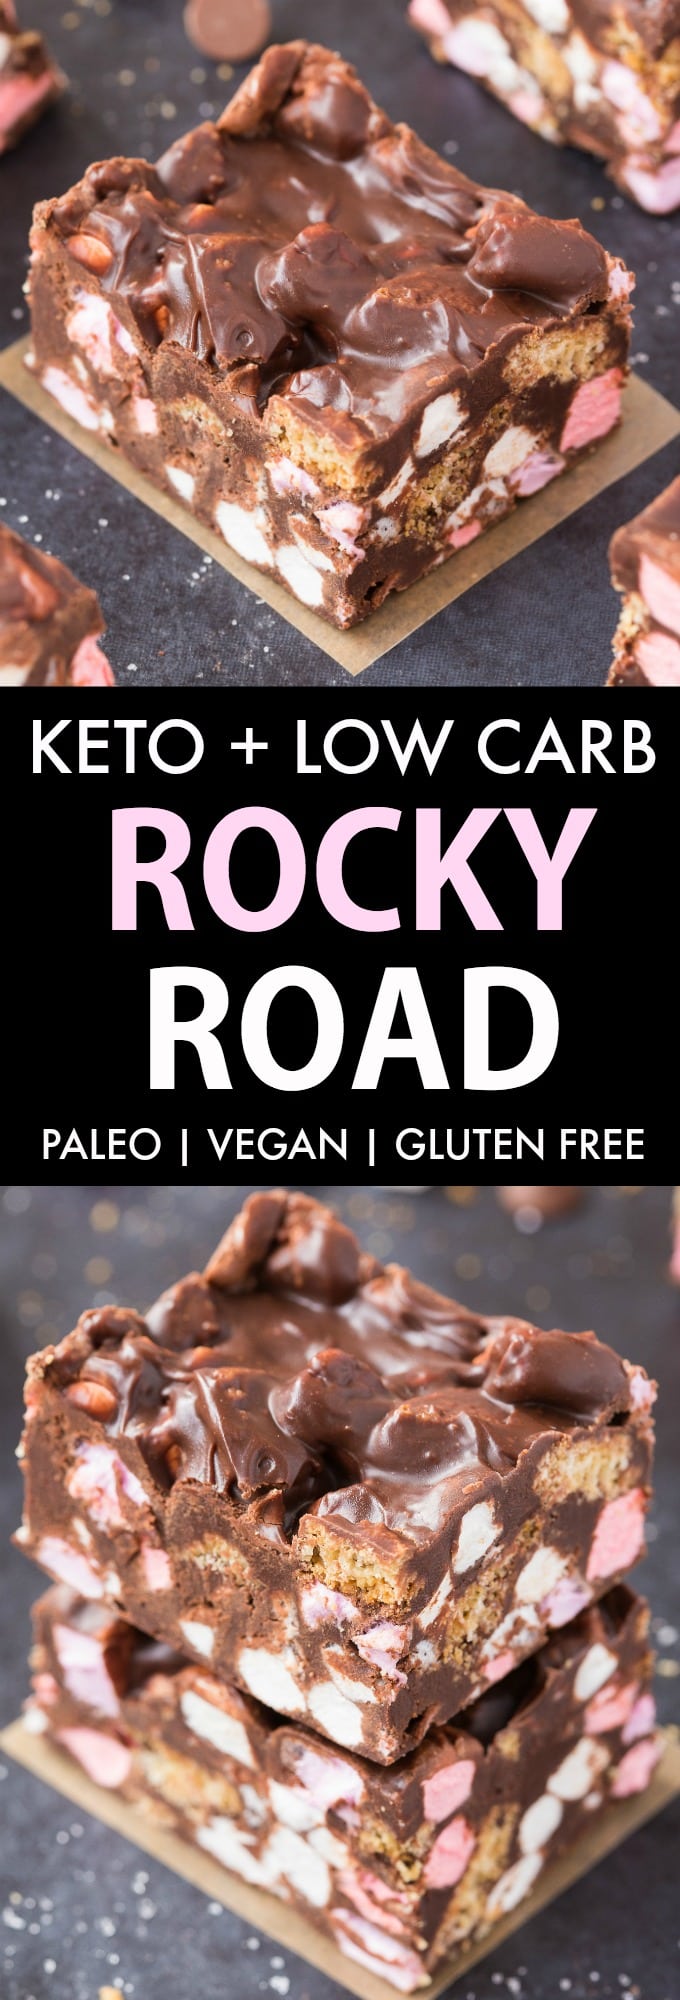 Keto Rocky Road Bars loaded with marshmallows and crunchy cookie pieces